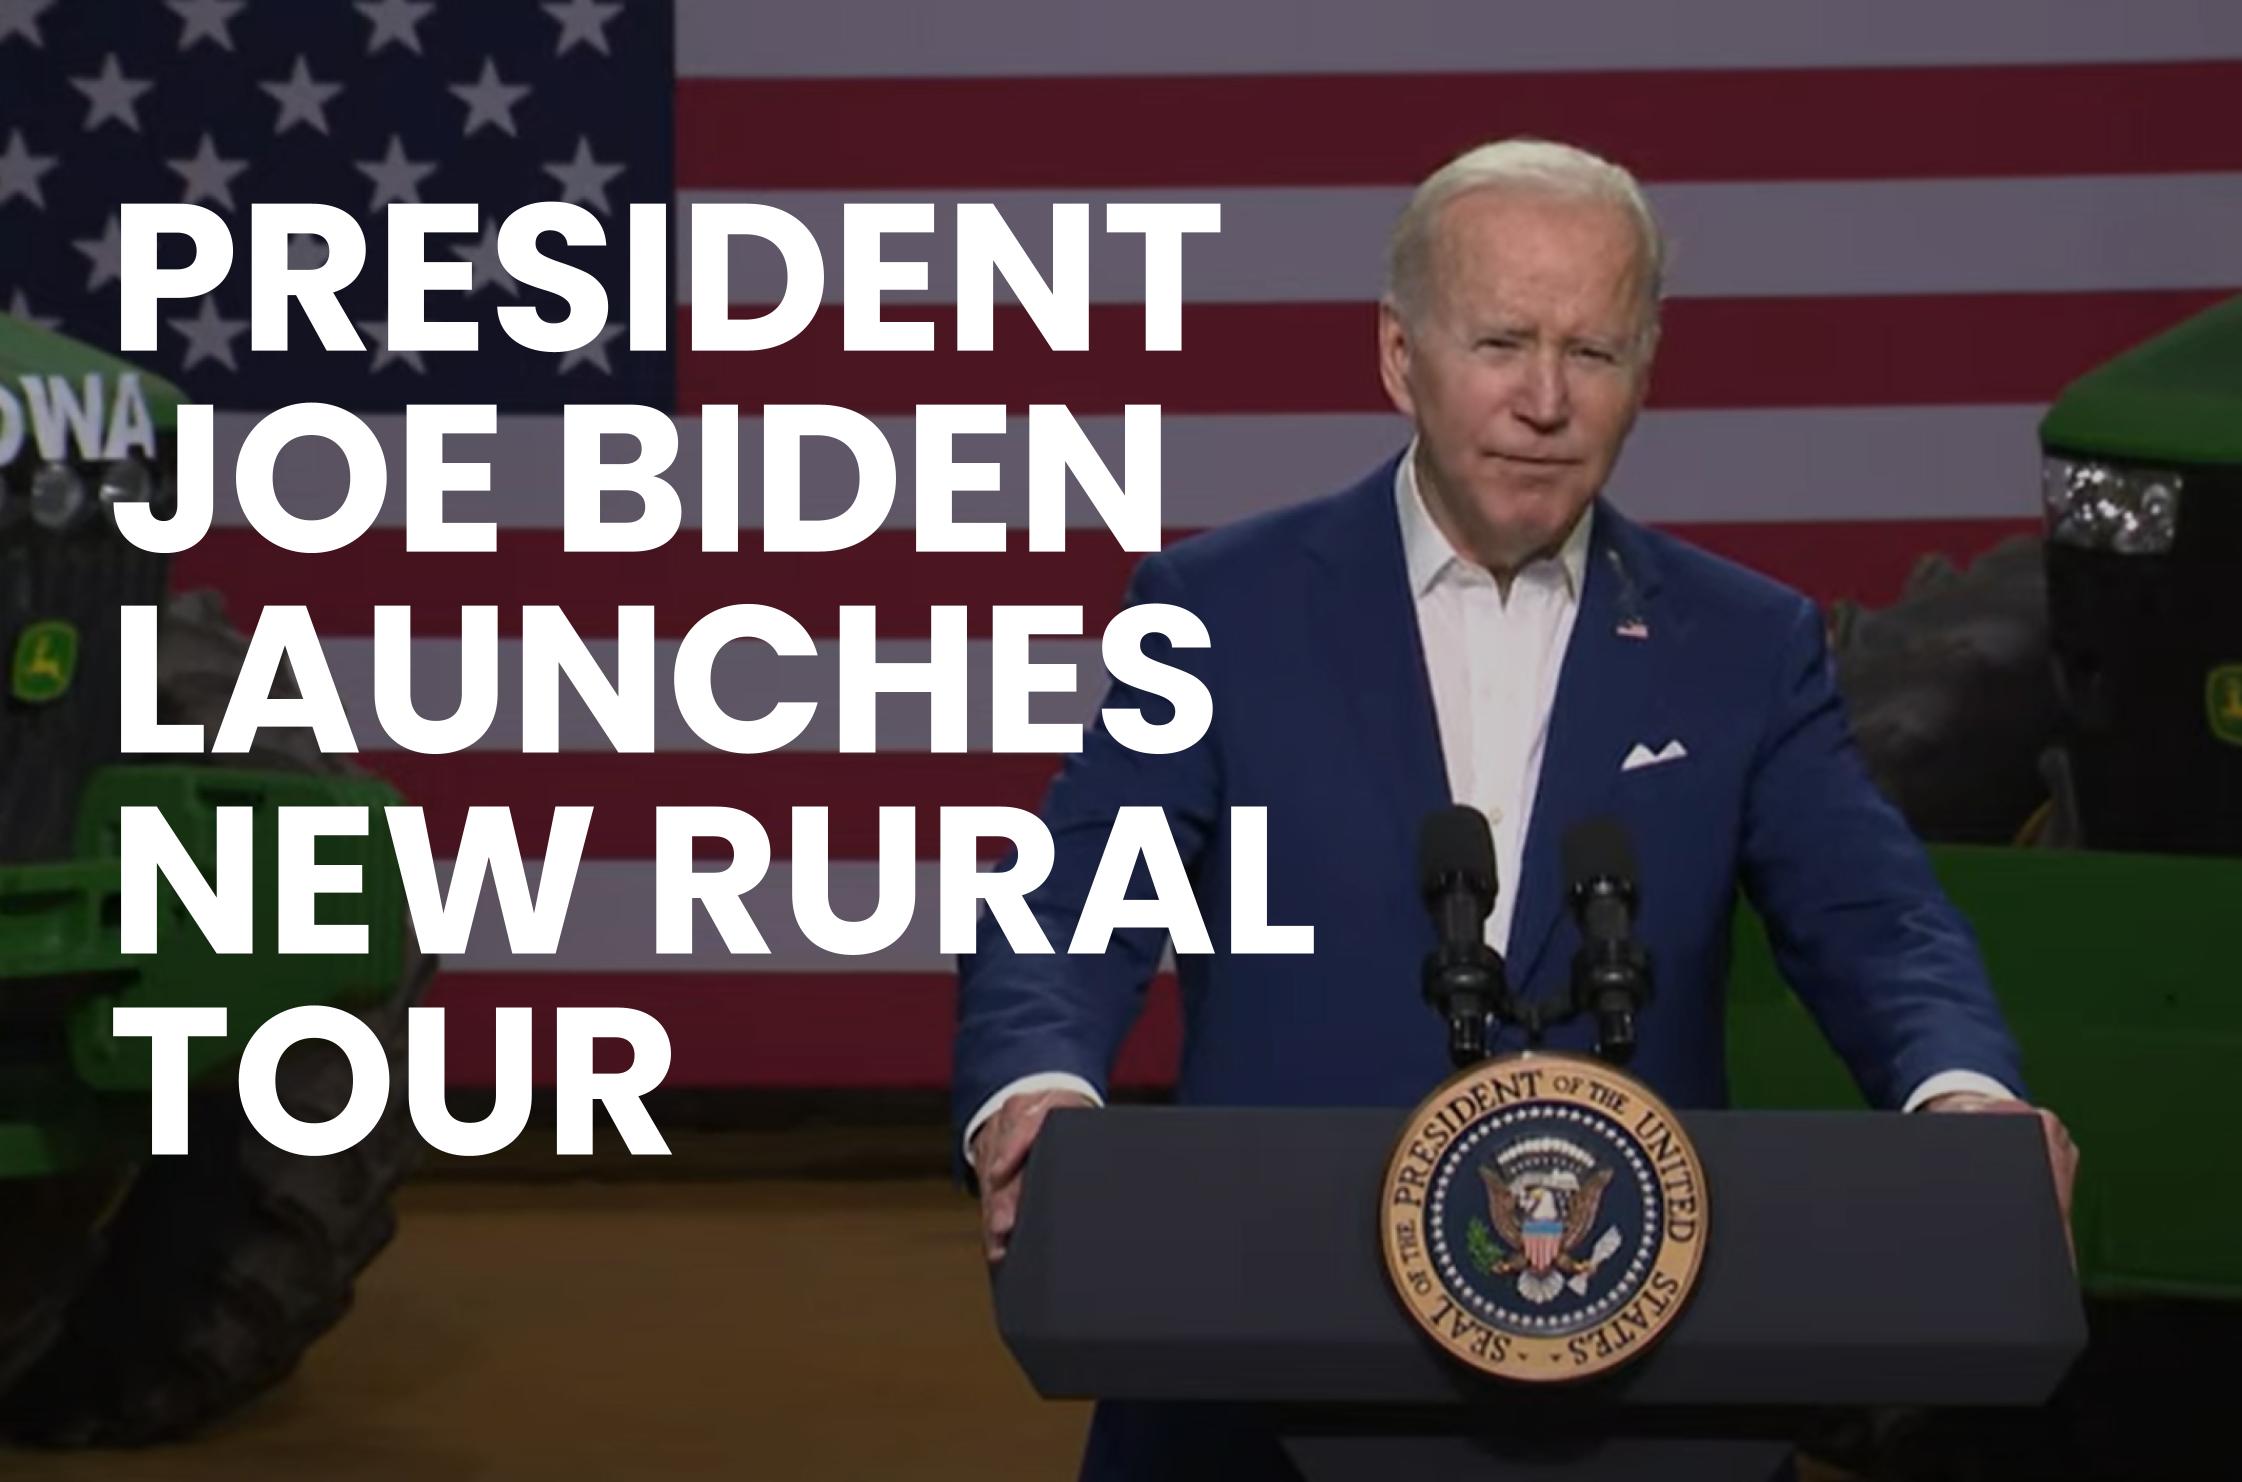 President Joe Biden stands at a podium in a blue suit and white shirt with noe tie. Text on the left side of image reads, "PRESIDENT JOE BIDEN LAUNCHES NEW RURAL TOUR"